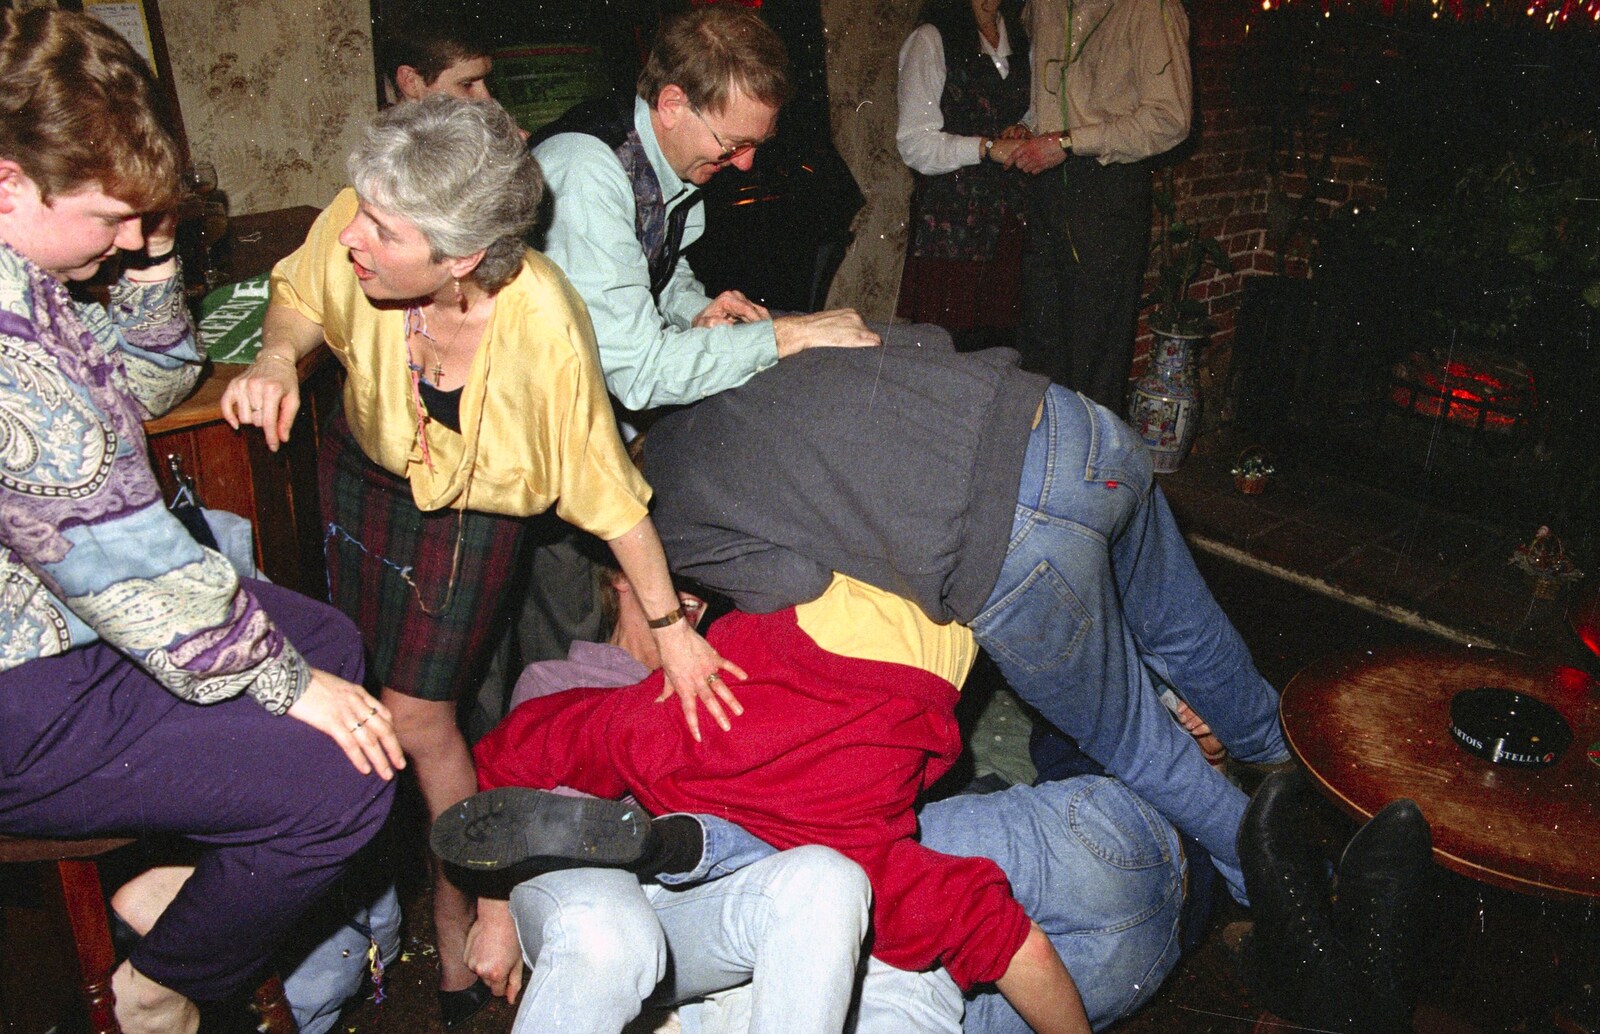 There's a massive pile of people on the floor from New Year's Eve at the Swan Inn, Brome, Suffolk - 31st December 1994